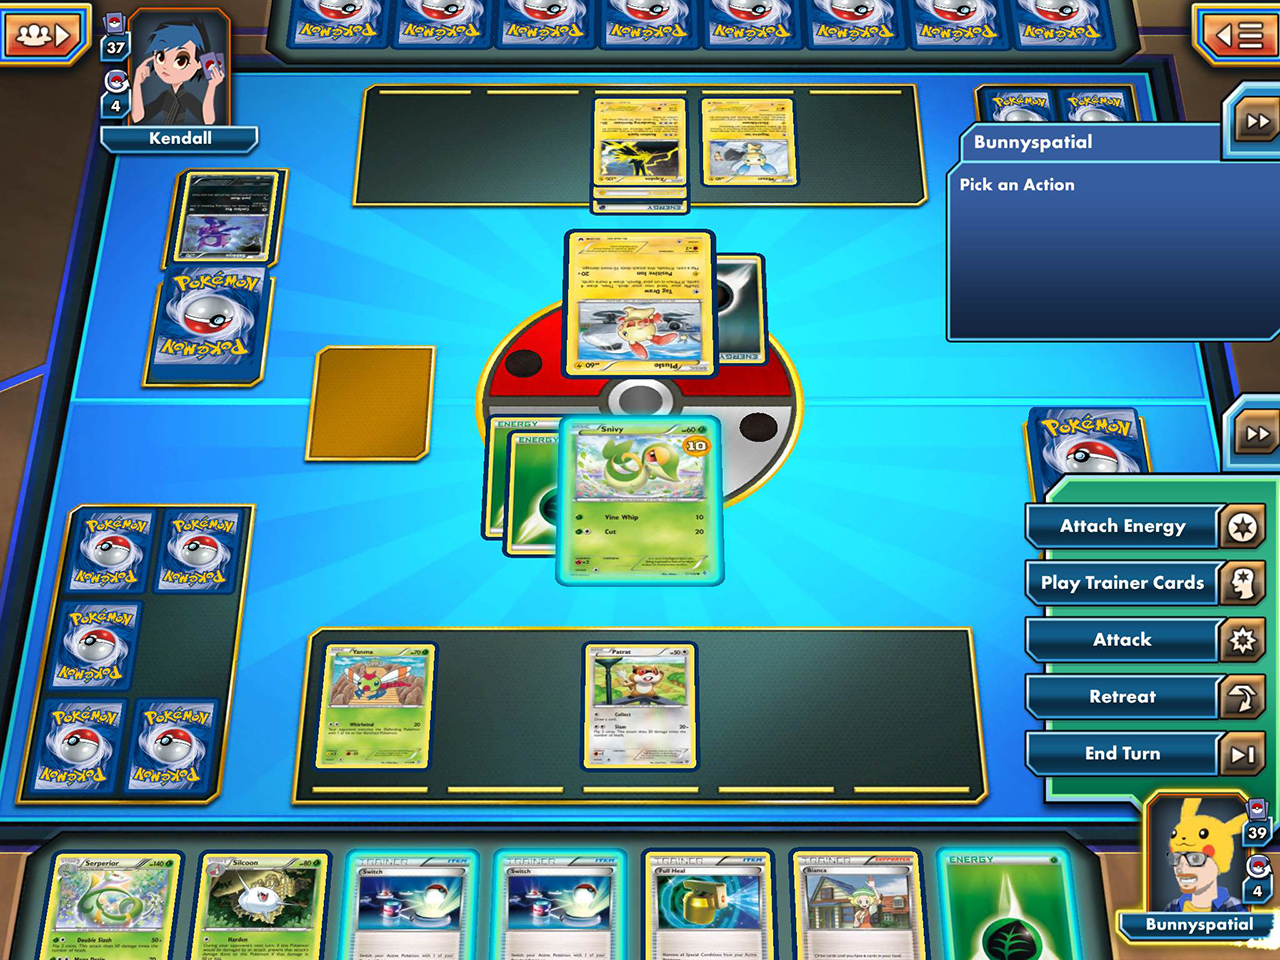 Getting Started With The Pokémon Trading Card Game